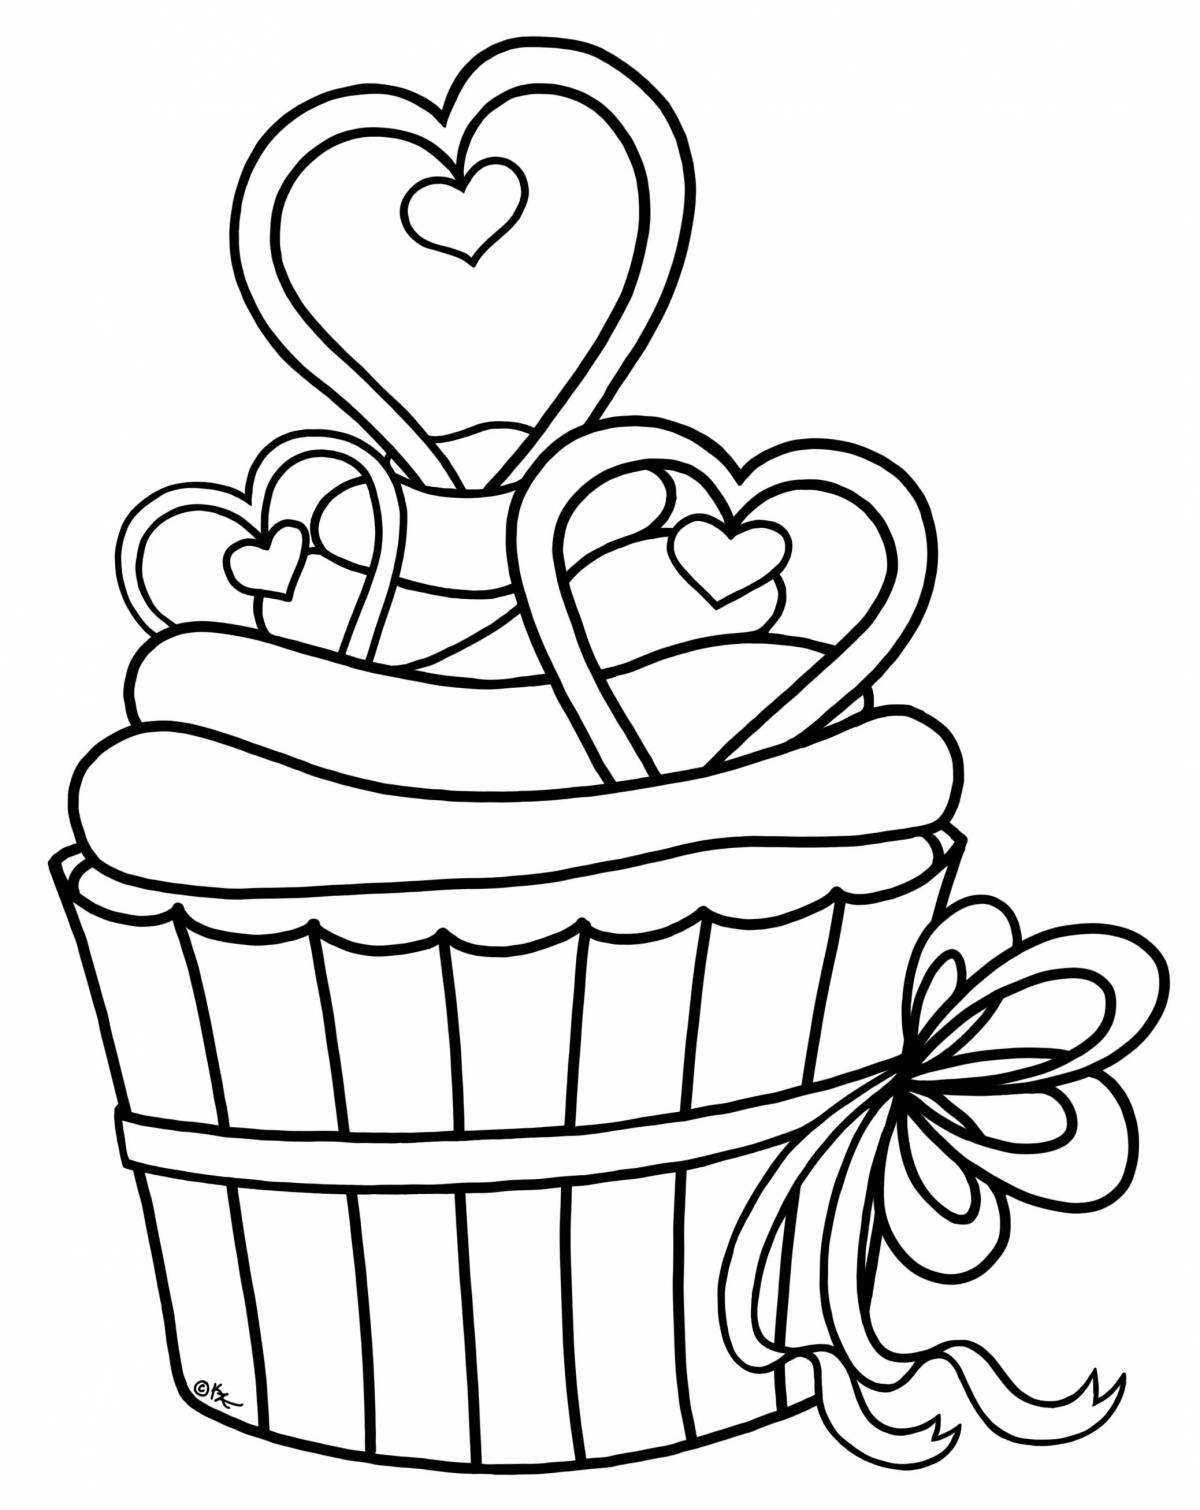 Tempting cake coloring pages